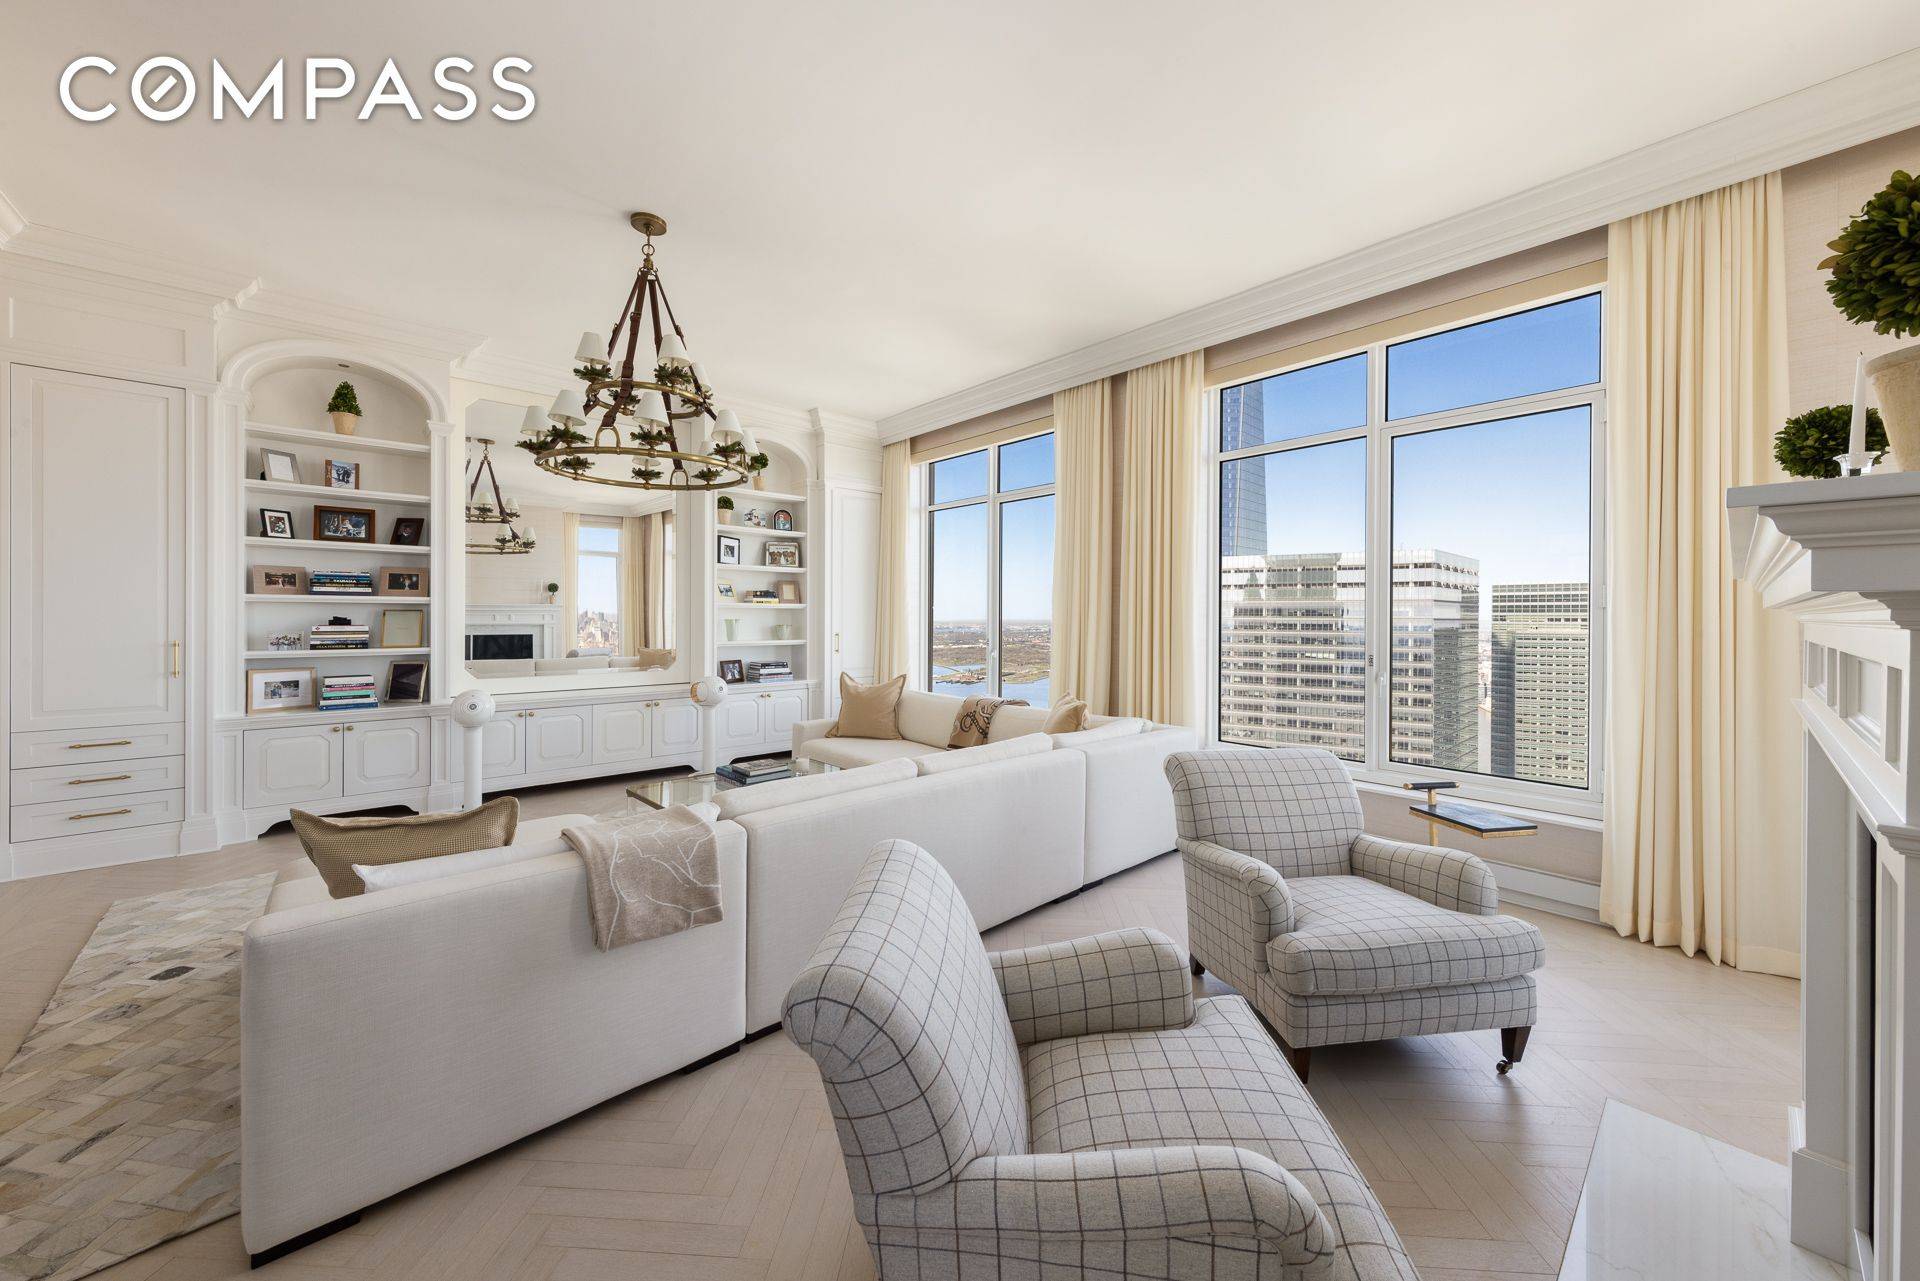 Tribeca 4br condo pristine perfection perched on the 67th floor of 30 Park Place.